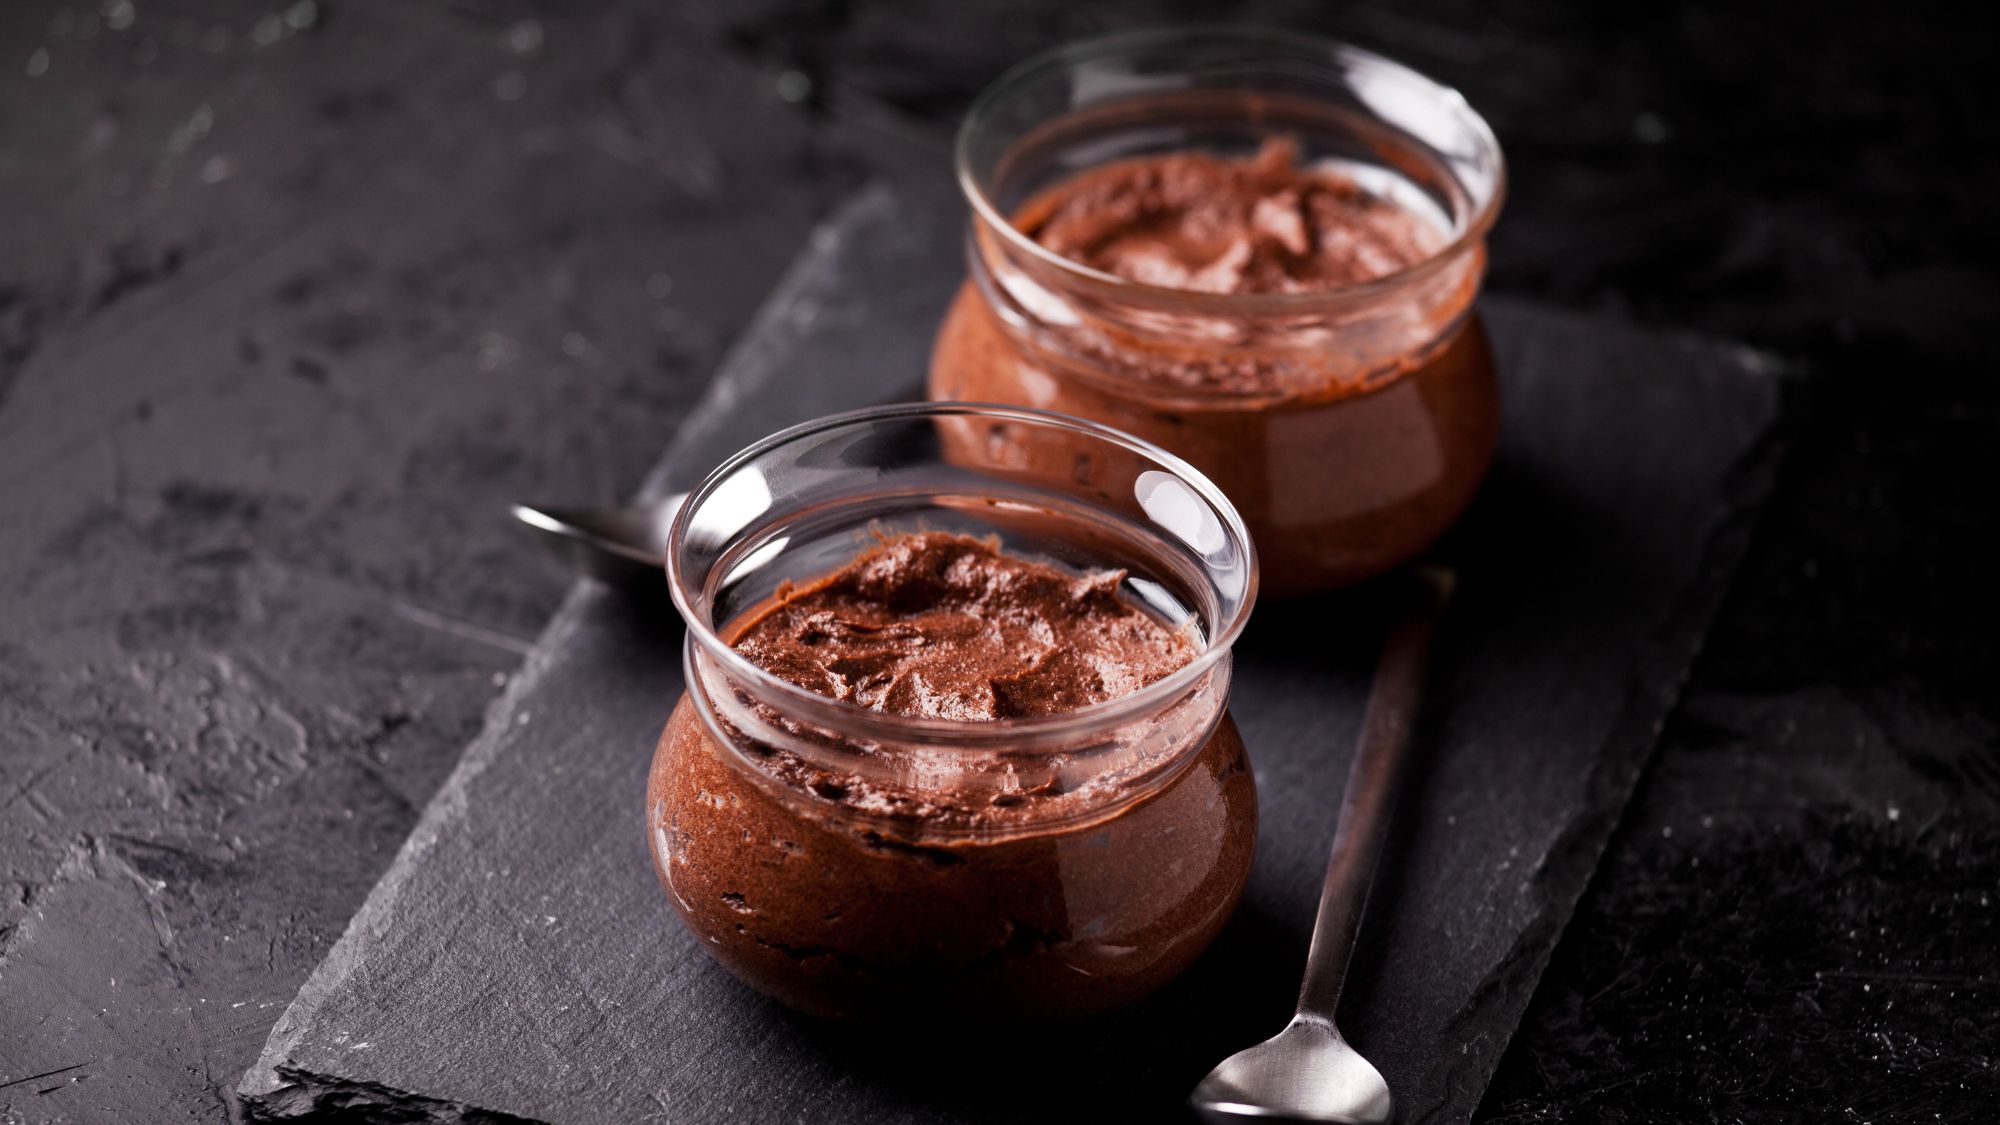 A tempting bowl of homemade chocolate mousse, prepared with only two ingredients, inspired by the viral TikTok trend.